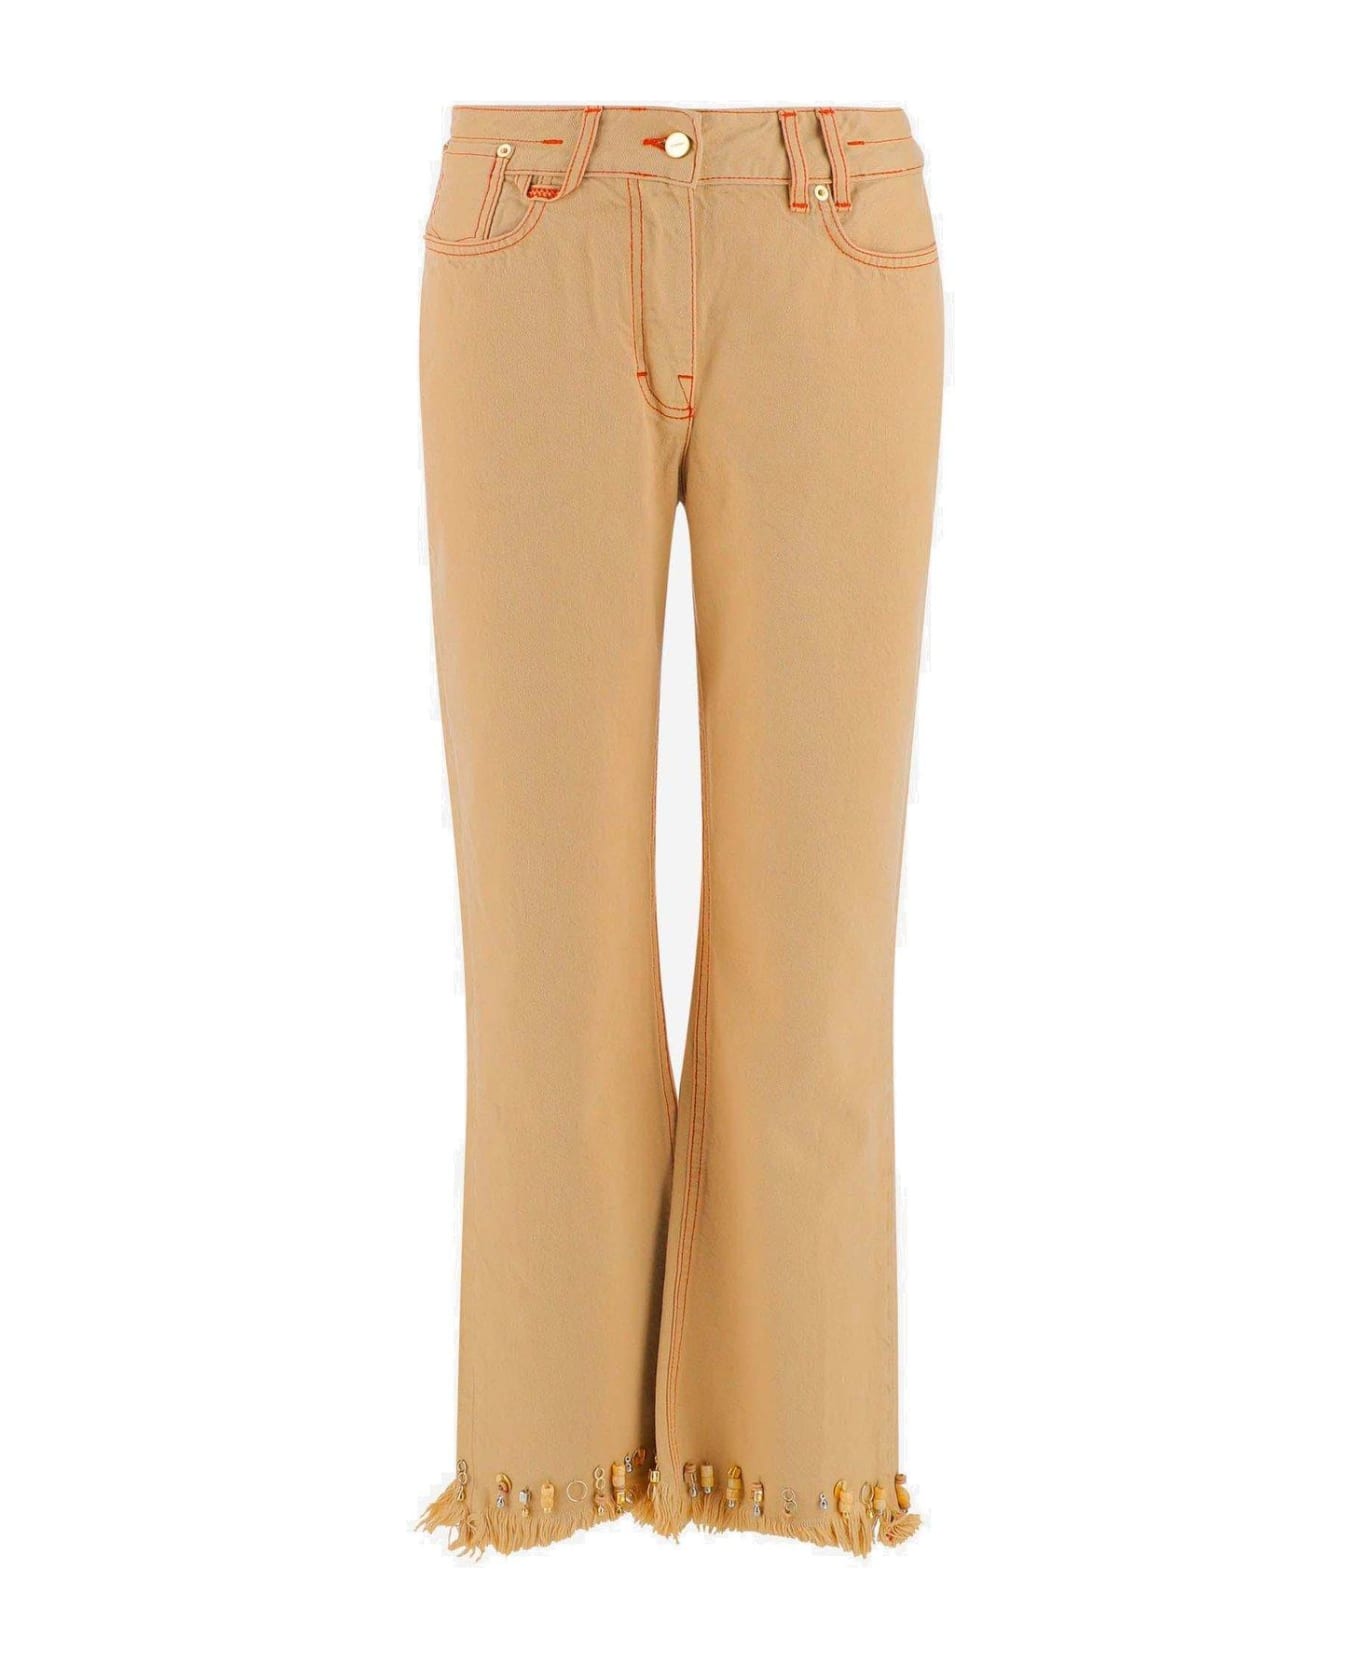 Jacquemus Distressed-effect Flared Jeans - Beige ボトムス